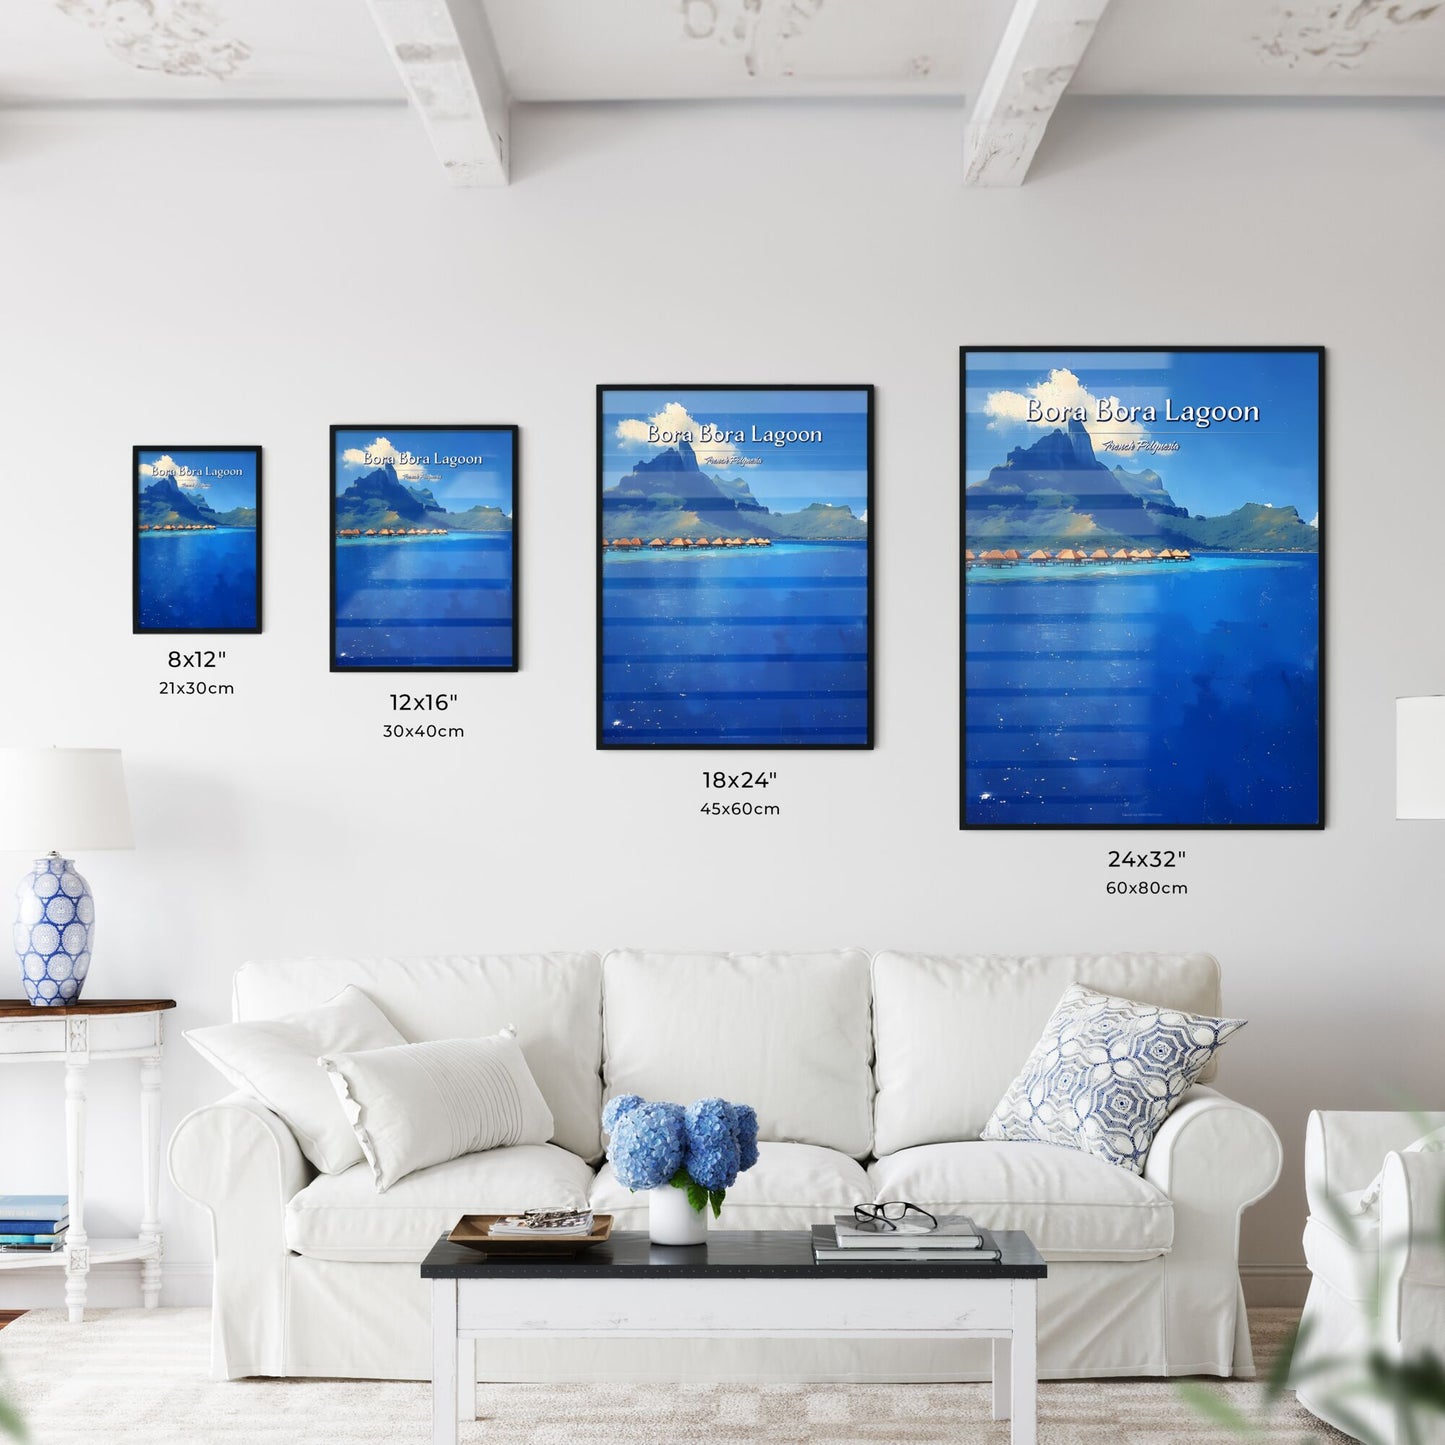 Bora Bora Lagoon, French Polynesia - Art print of a group of people in a large room with columns Default Title